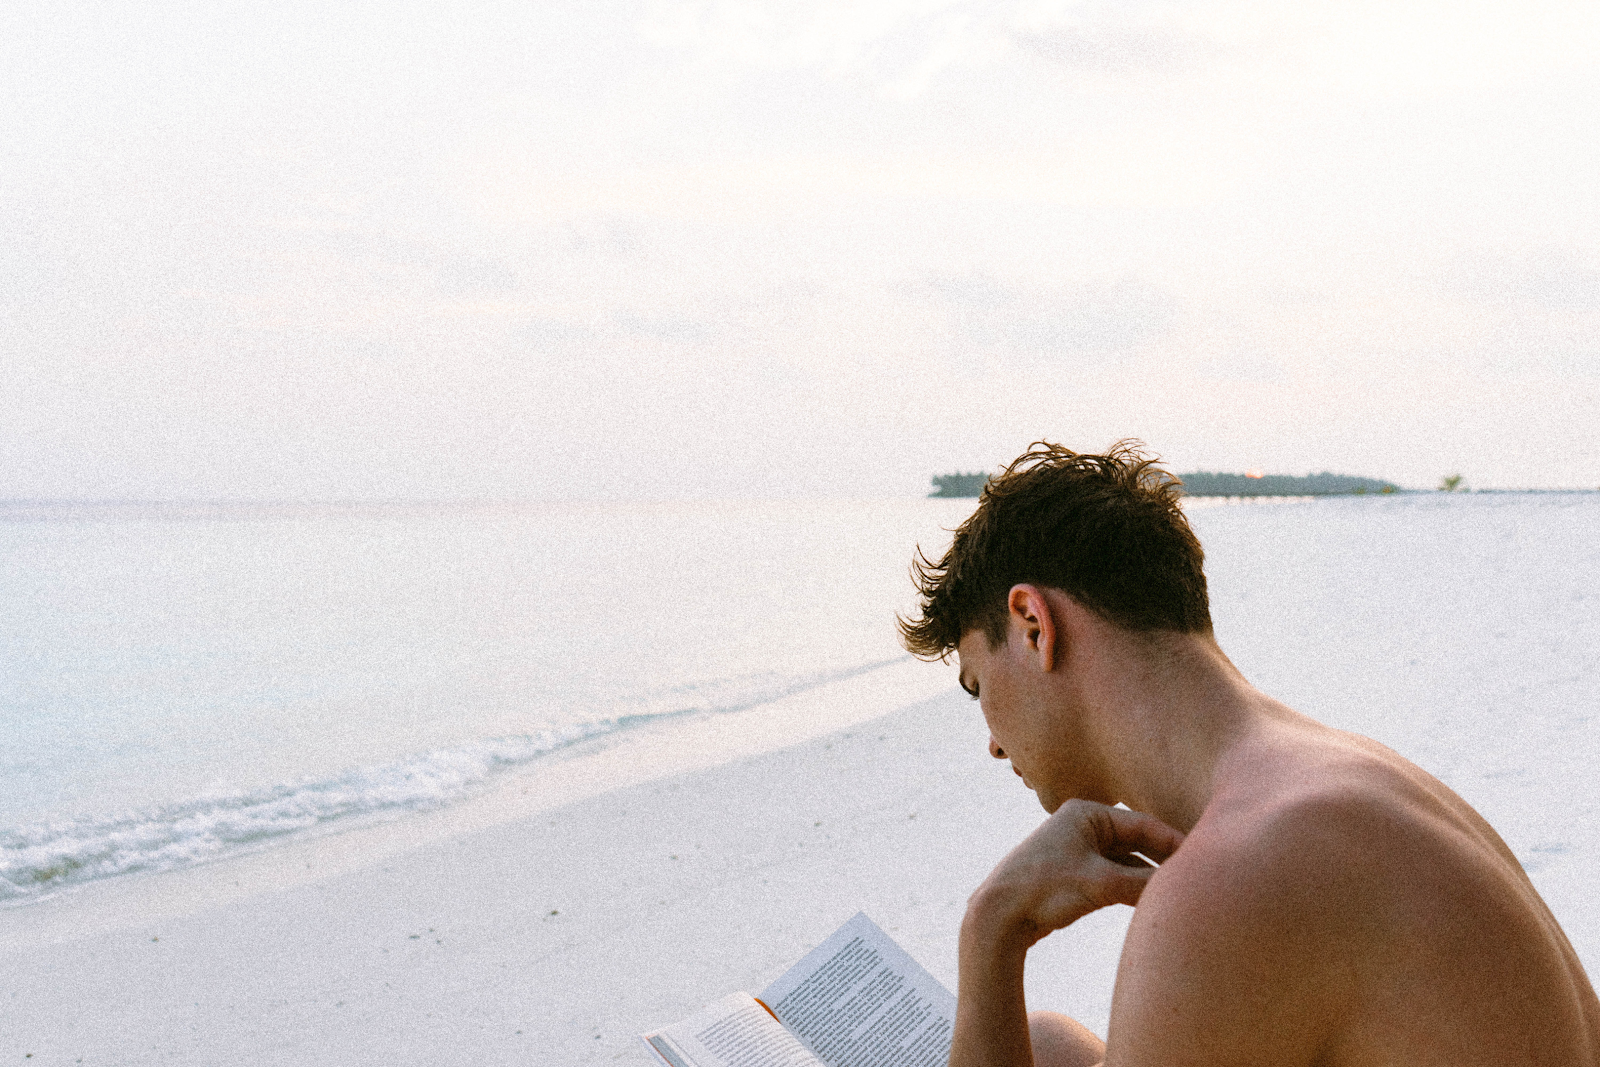 A man reading a book while on the beach.